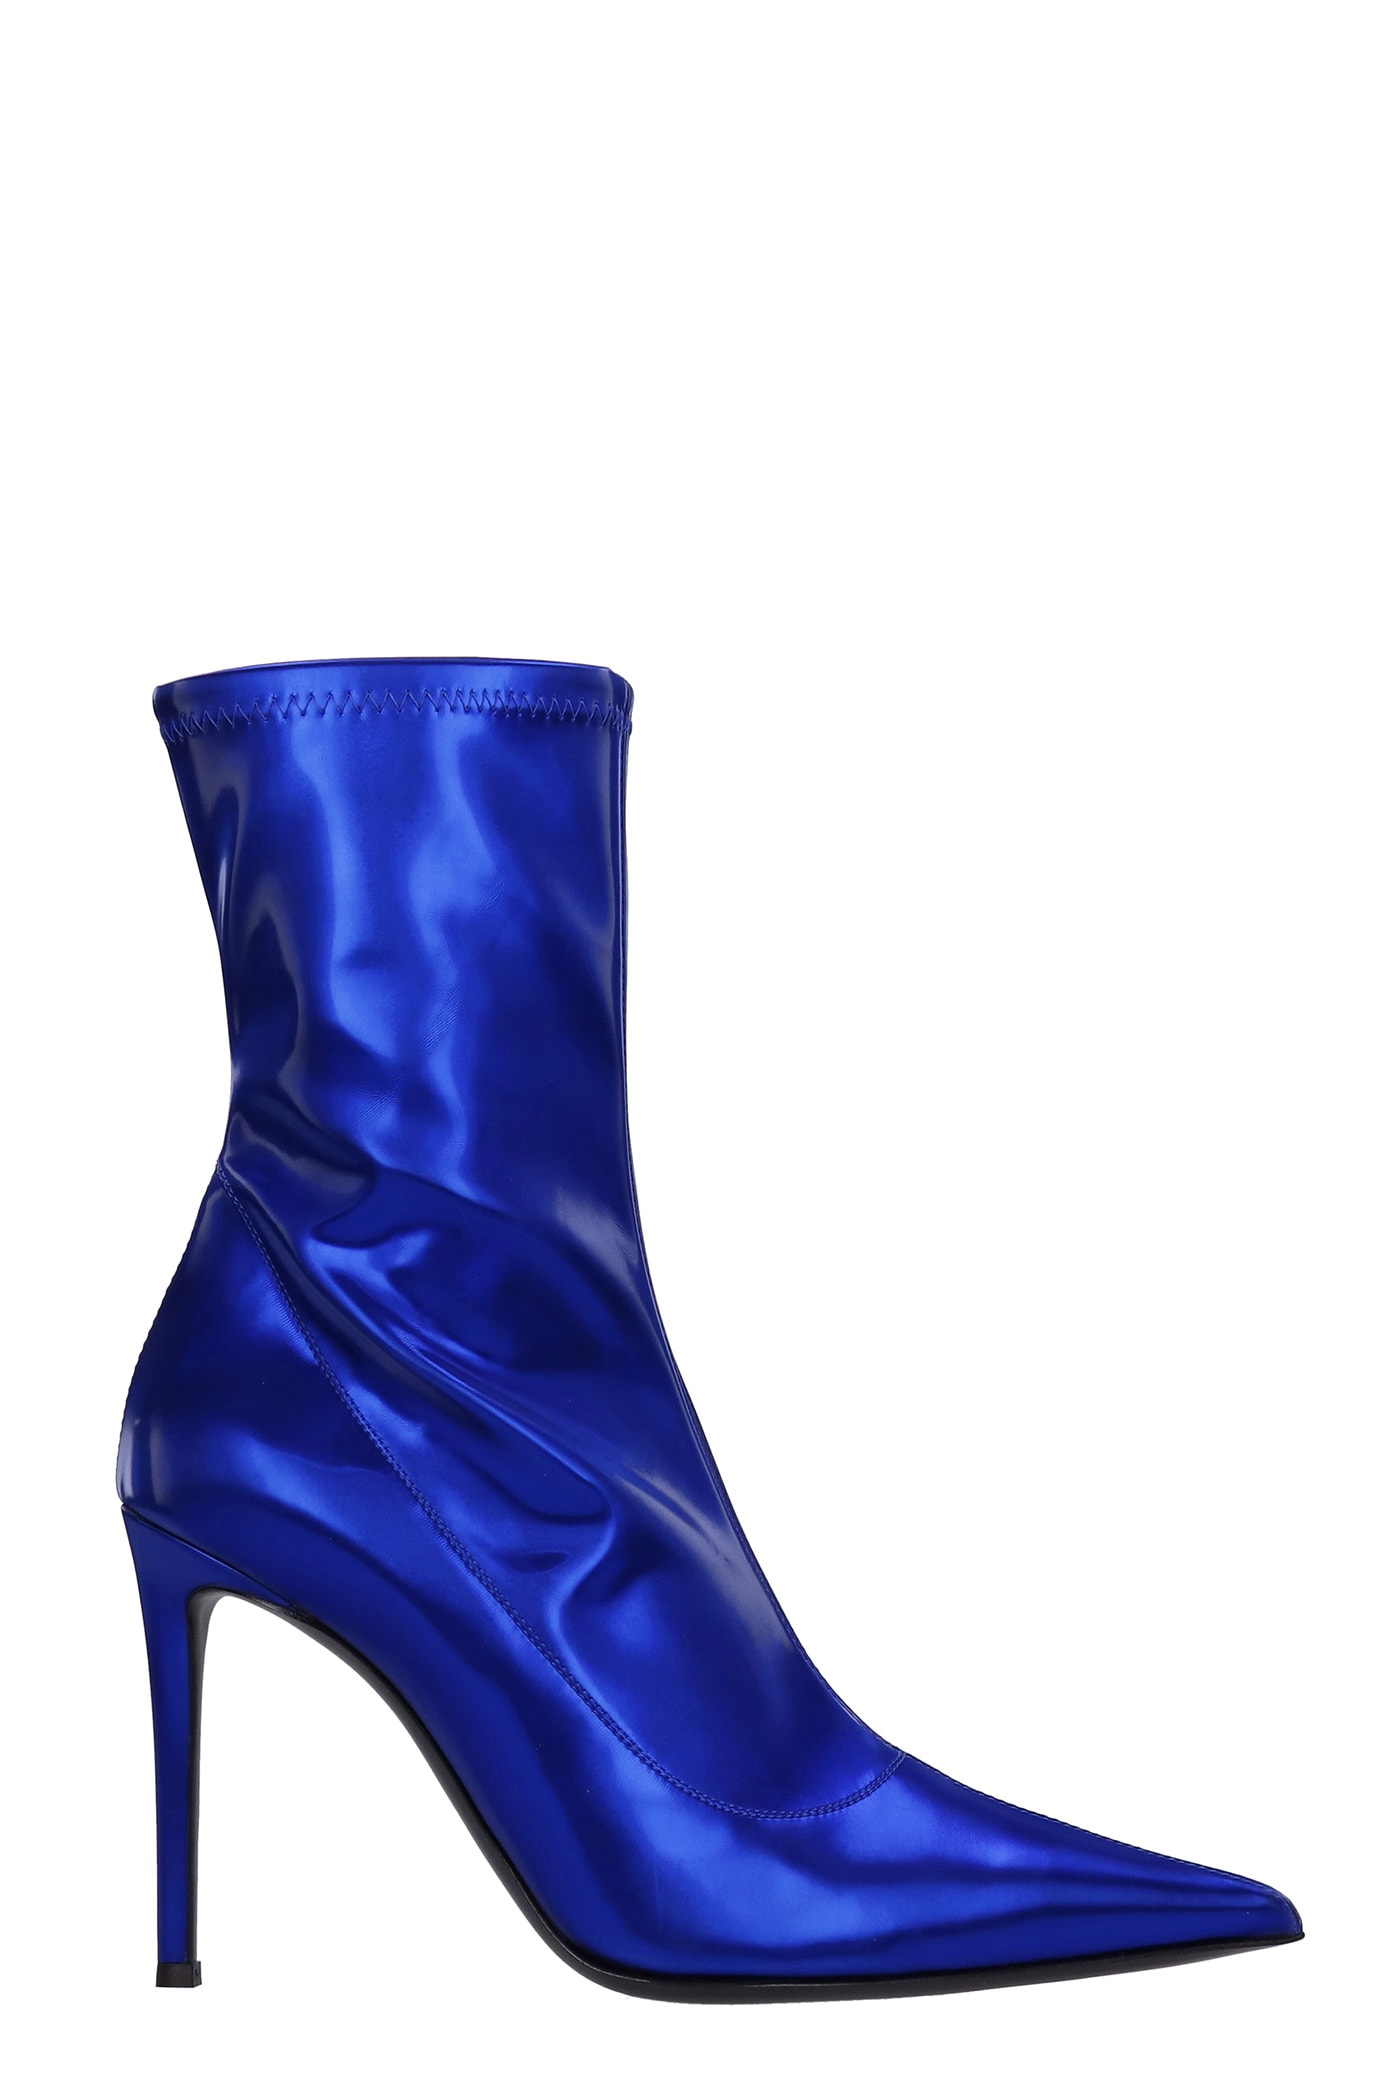 Giuseppe Zanotti Ametista High Heels Ankle Boots In Blue Leather